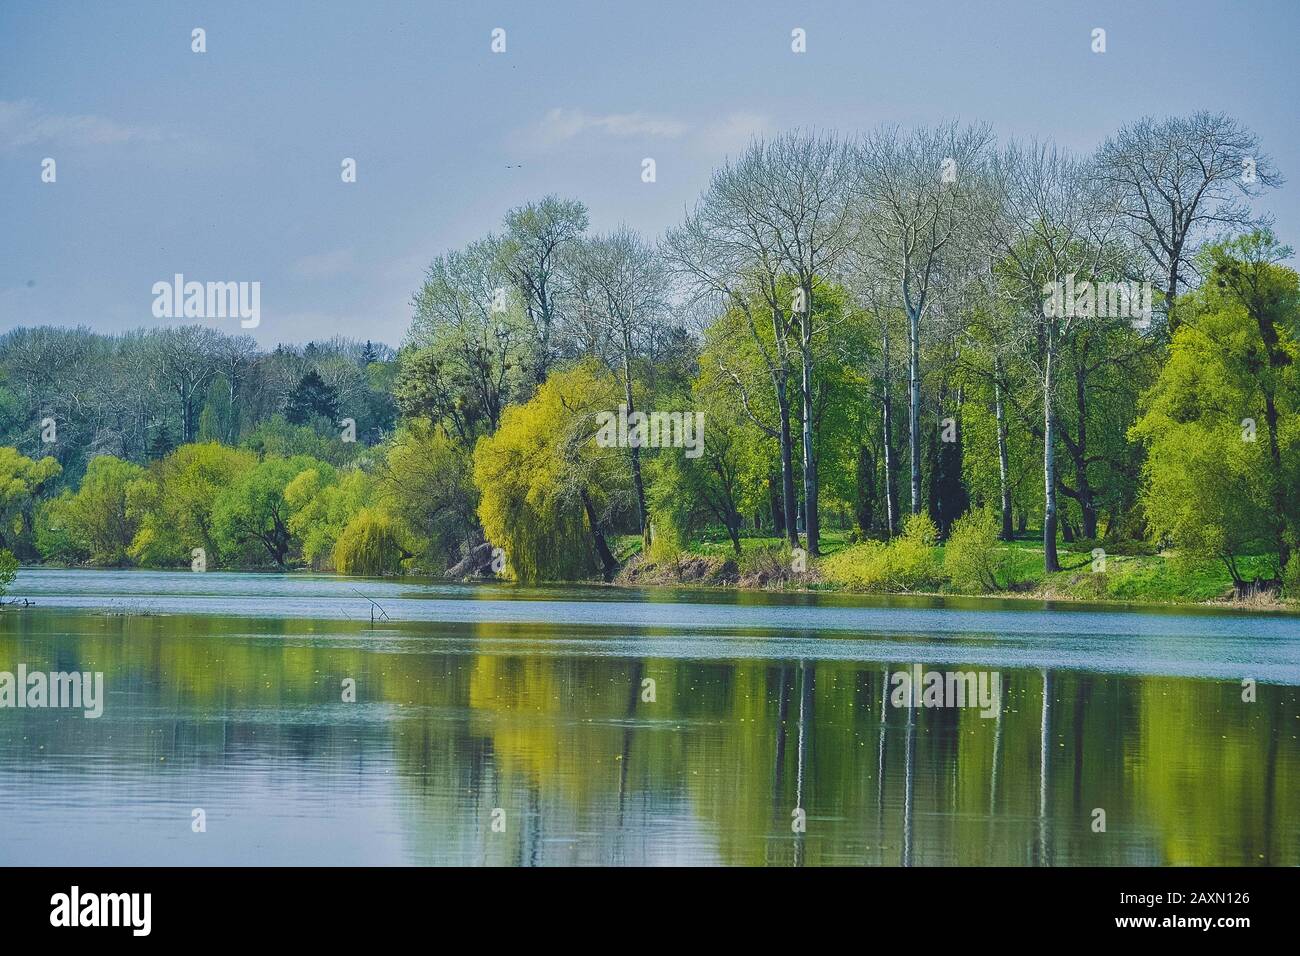 Trees with spring foliage on the bank of the river on a sunny day Stock Photo